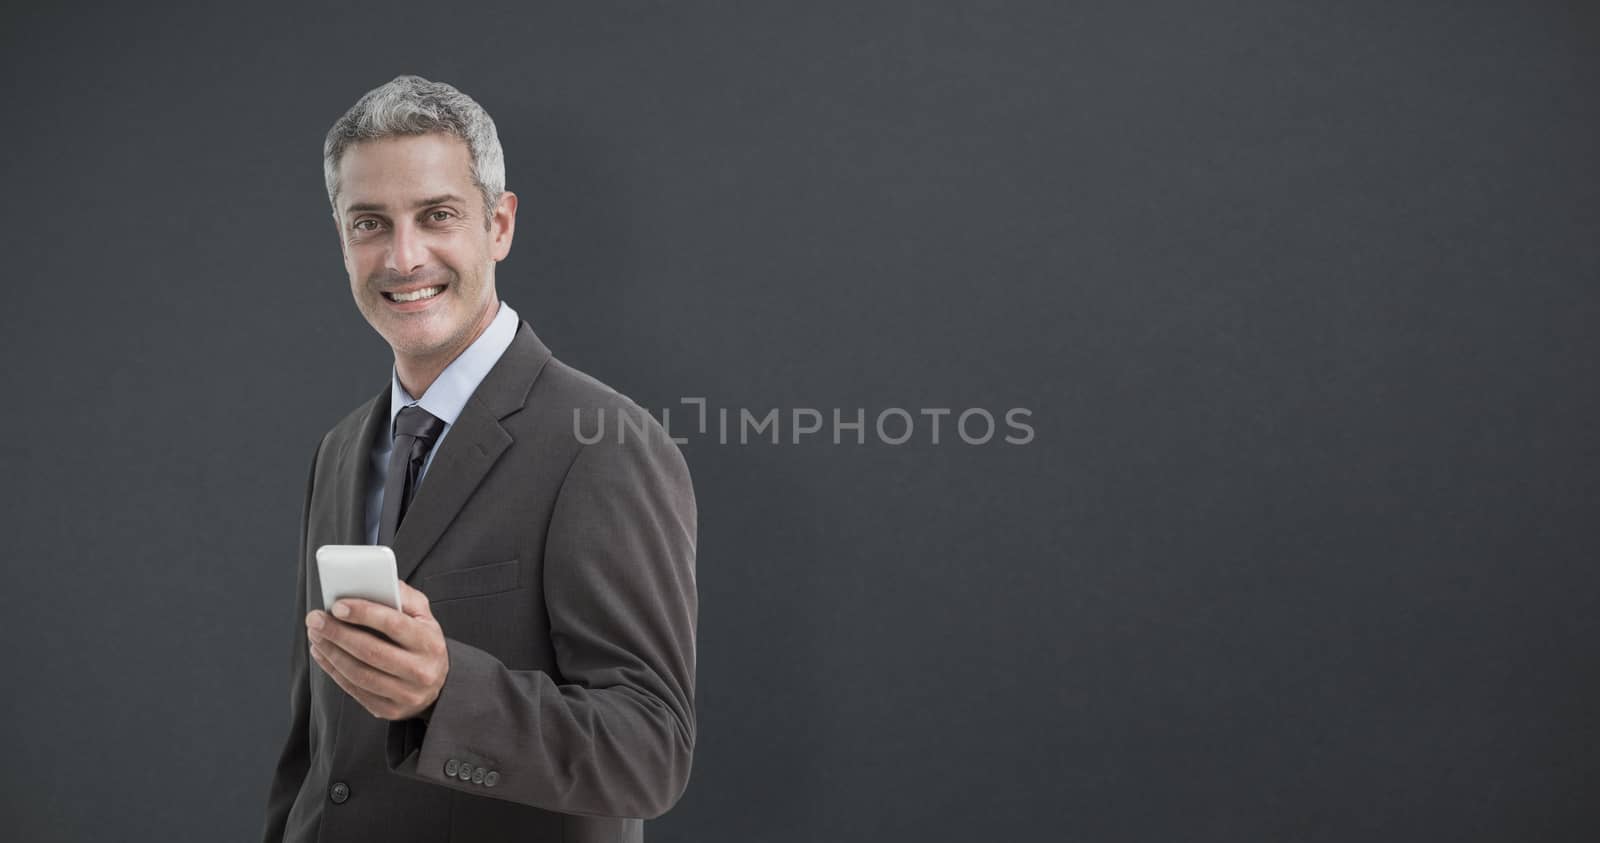 Composite image of portrait of smiling businessman holding mobile phone by Wavebreakmedia